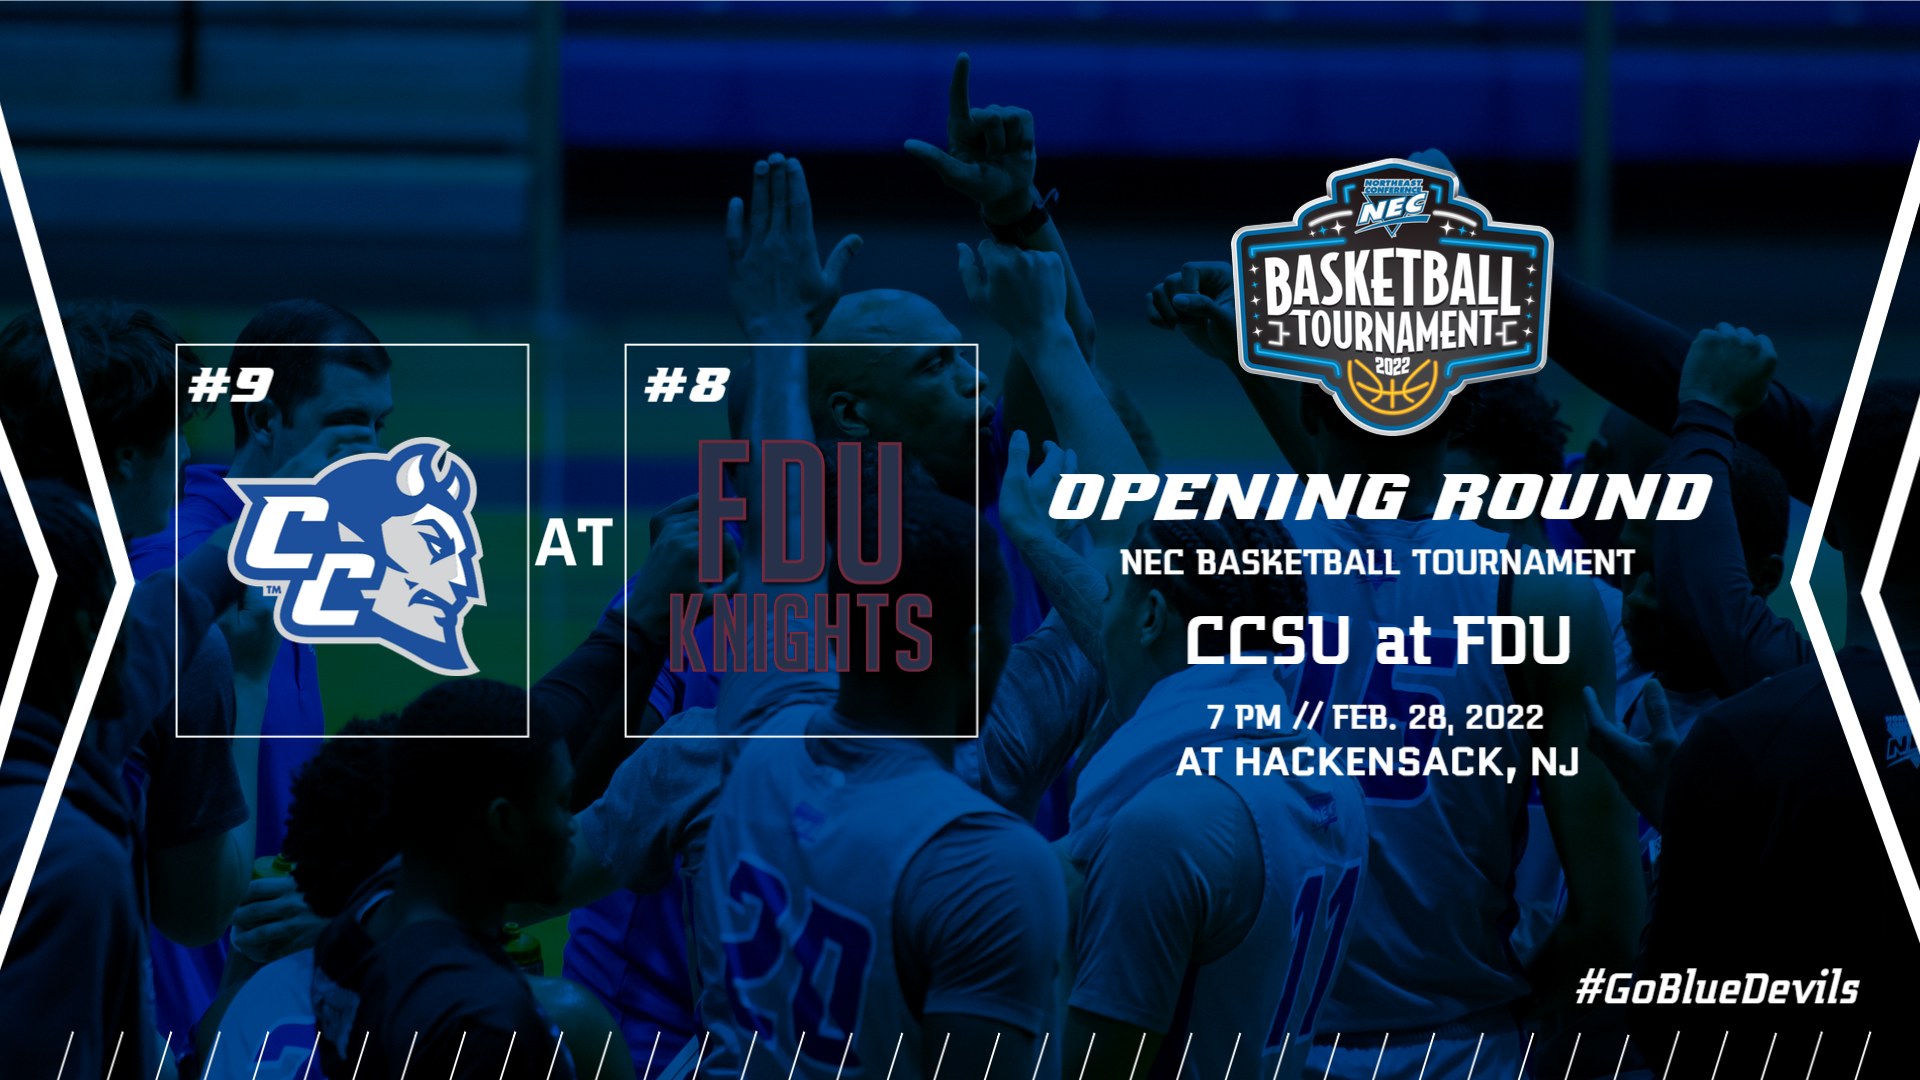 Men's Basketball Travels to FDU For NEC Tournament Opening Round